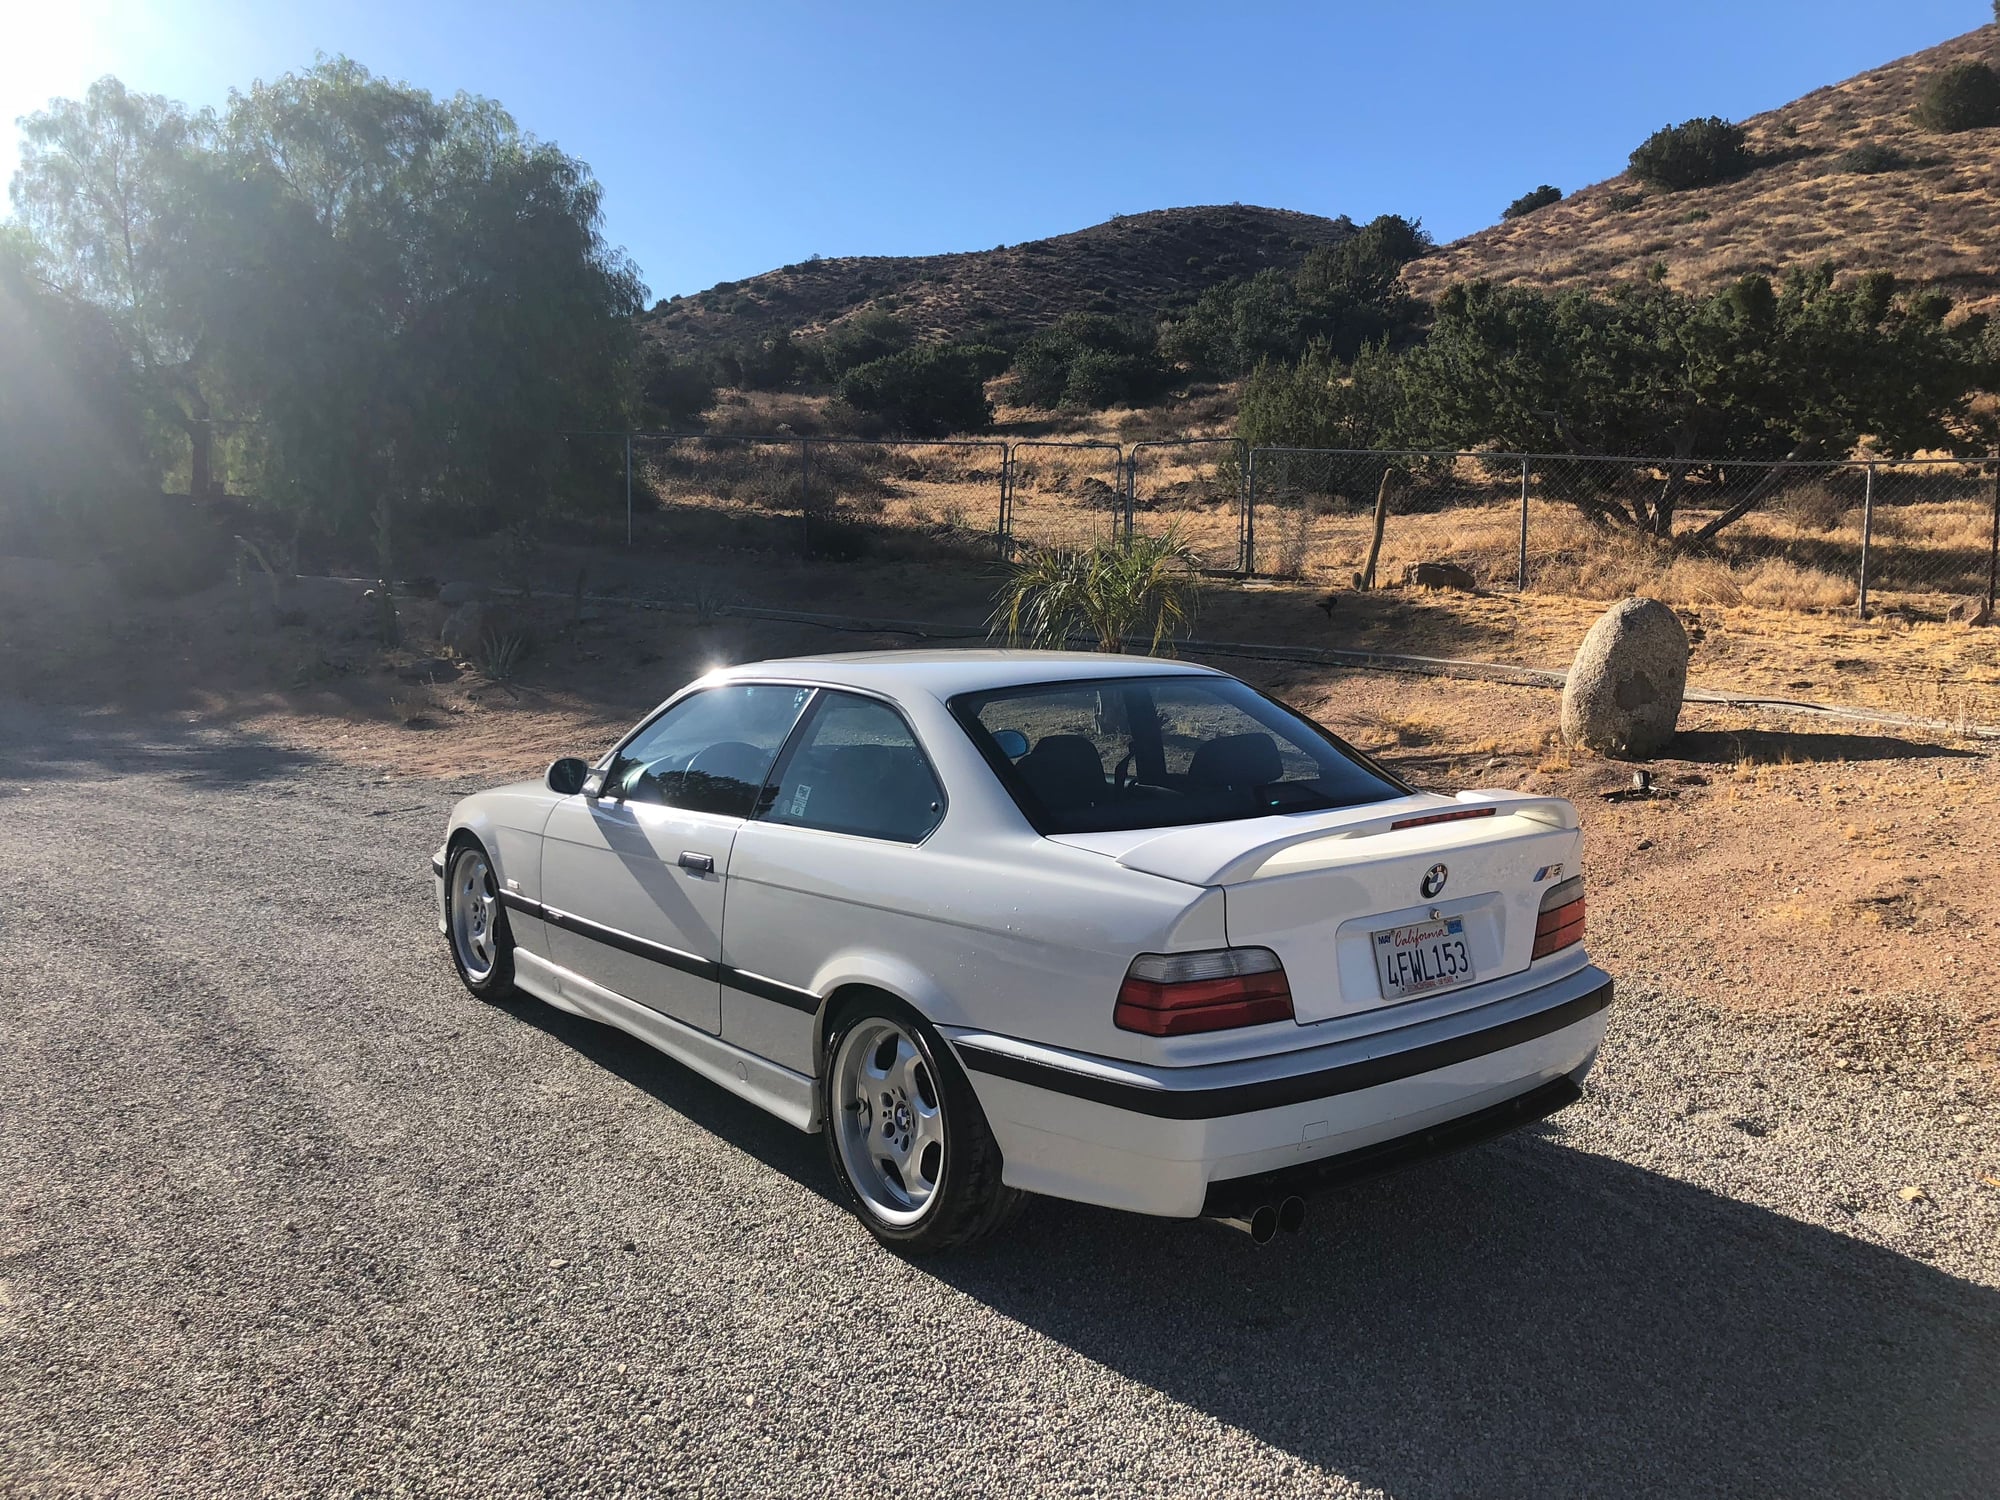 1999 BMW M3 - One owner. 1999 BMW E36 M3 - Used - VIN WBSBG9339XEY81639 - 145,120 Miles - 6 cyl - 2WD - Manual - Coupe - White - Burbank, CA 91502, United States